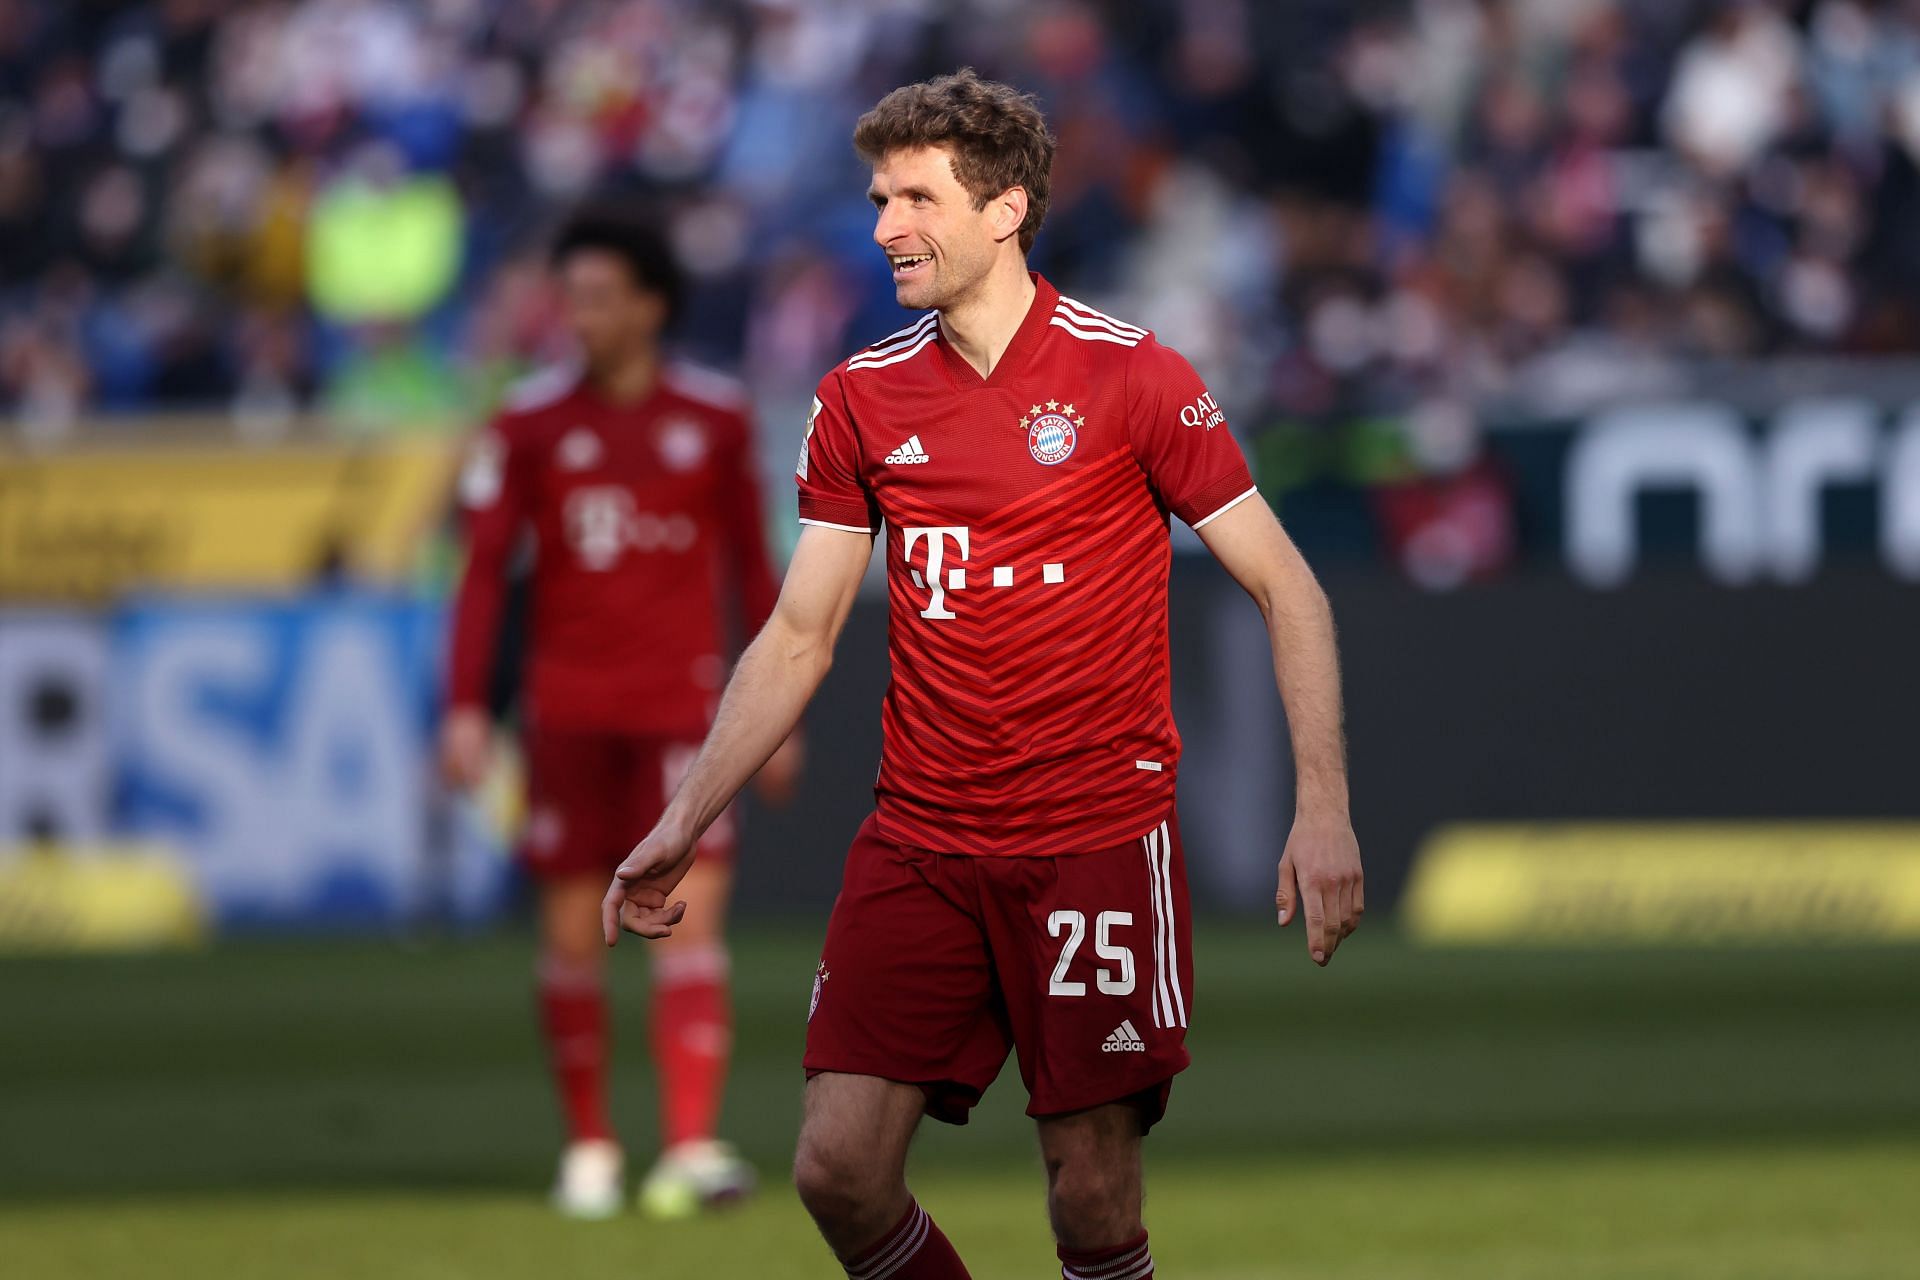 Muller has accumulated countless trophies with Bayern Munich.